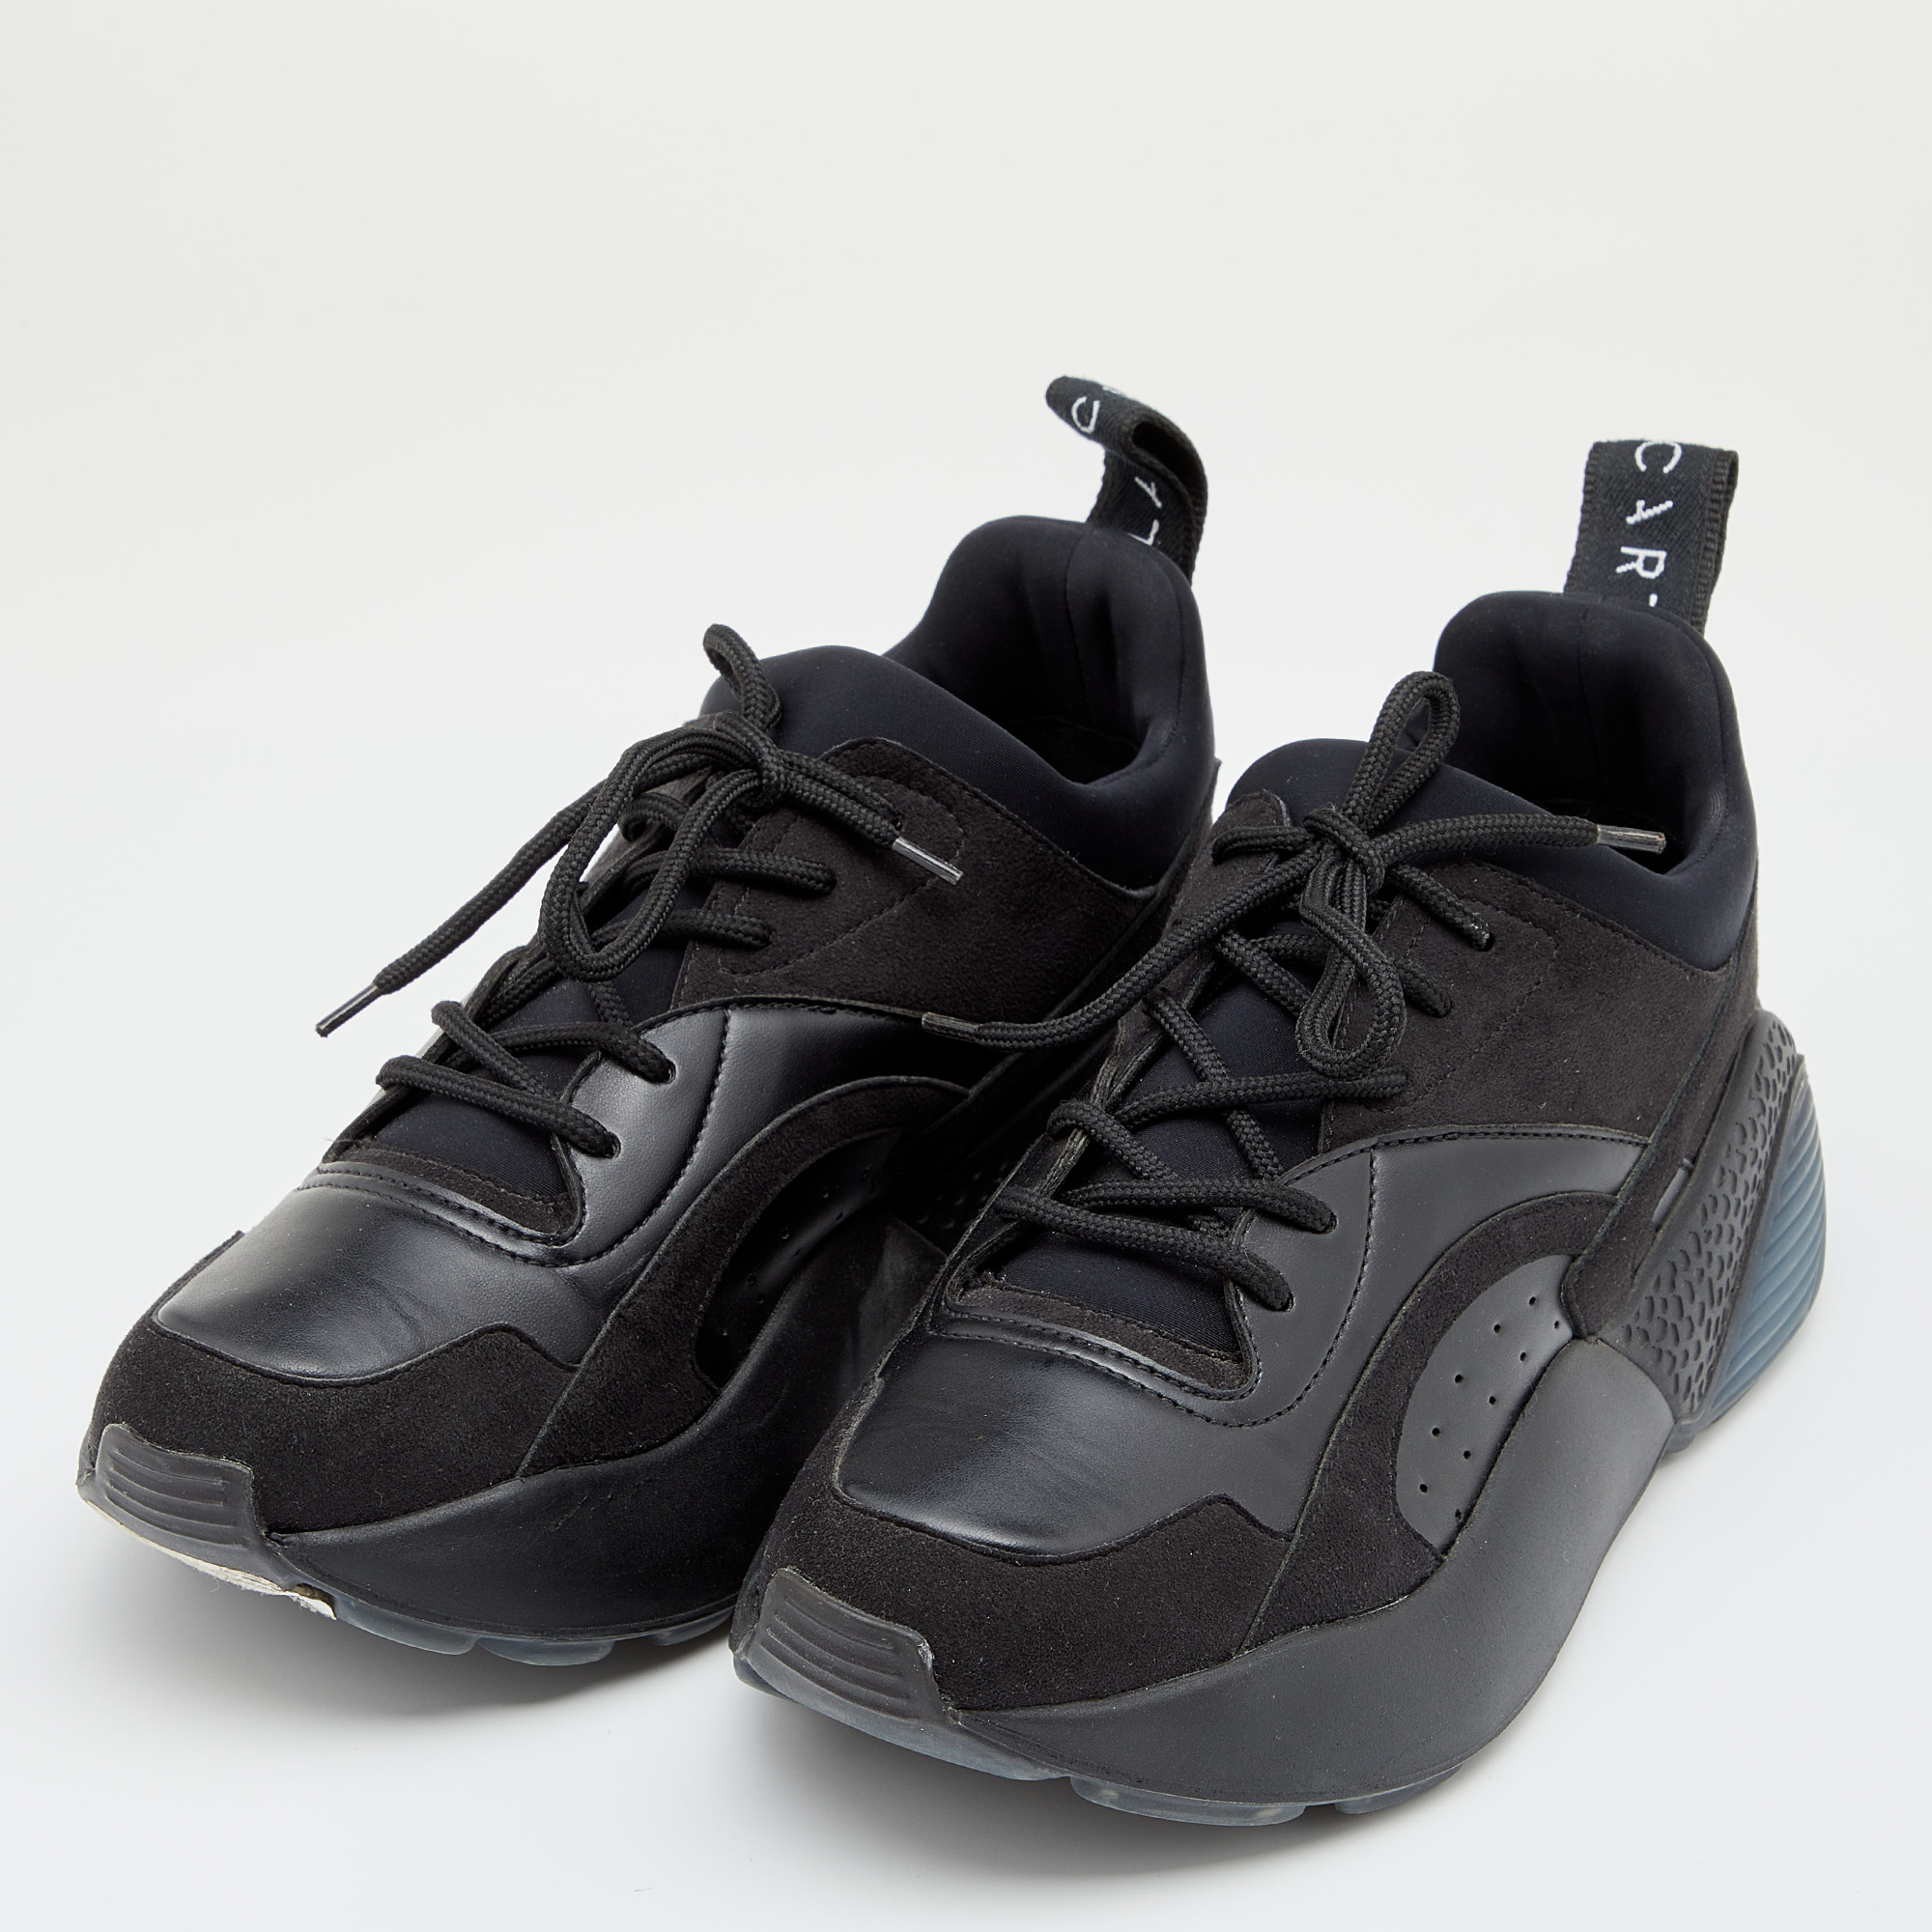 

Stella McCartney Black Neoprene, Faux Leather and Faux Suede Eclypse Chunky Sneakers Size